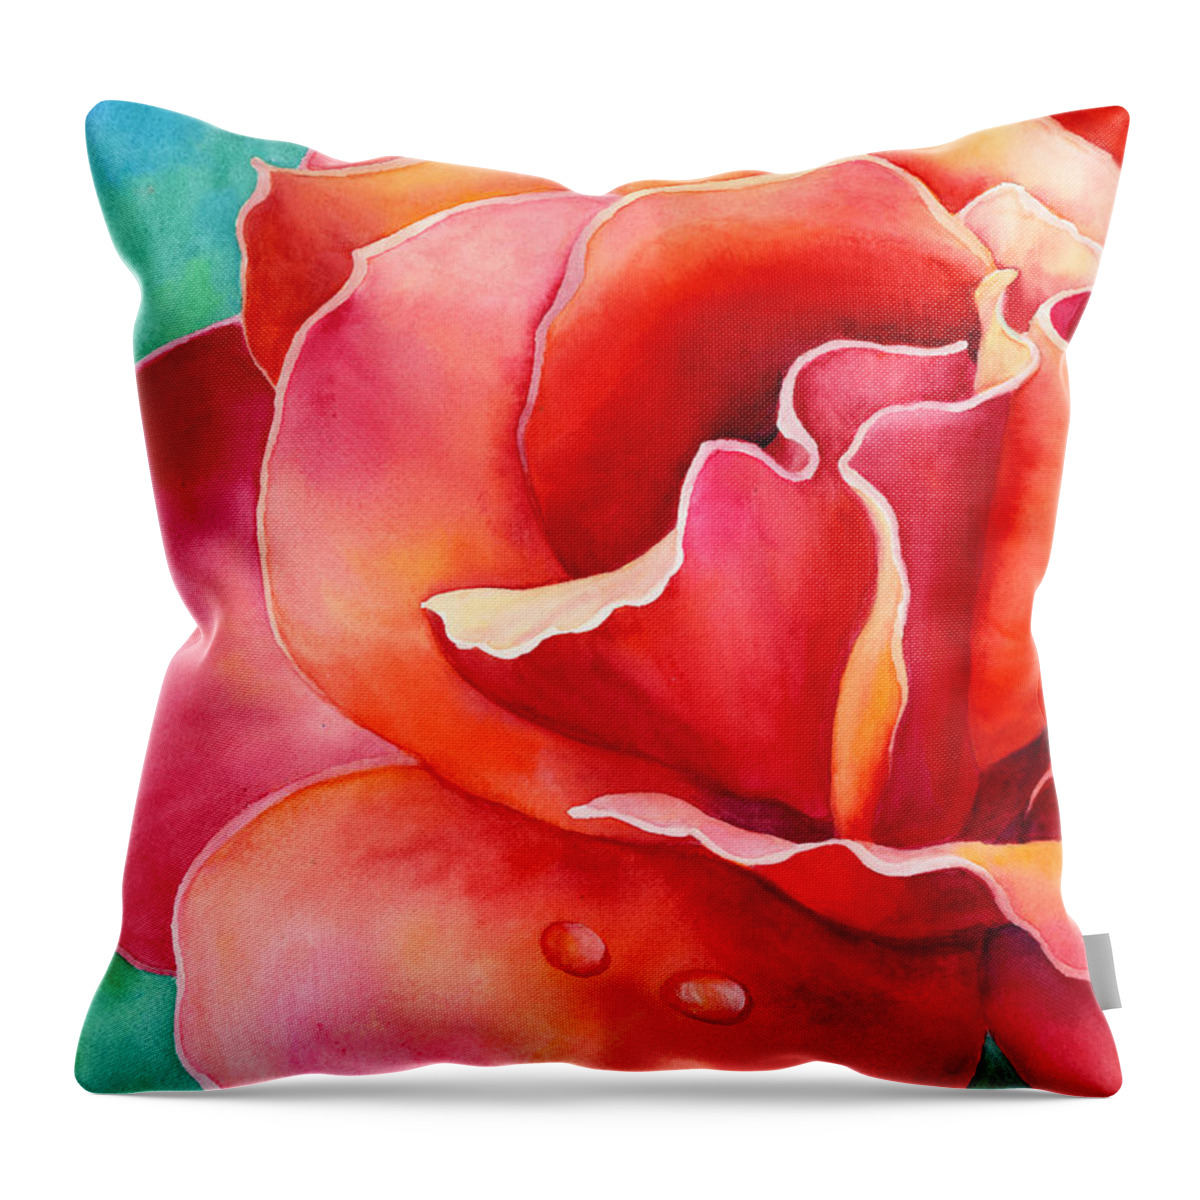 Rose Throw Pillow featuring the painting Peach Rose 2 by Hailey E Herrera